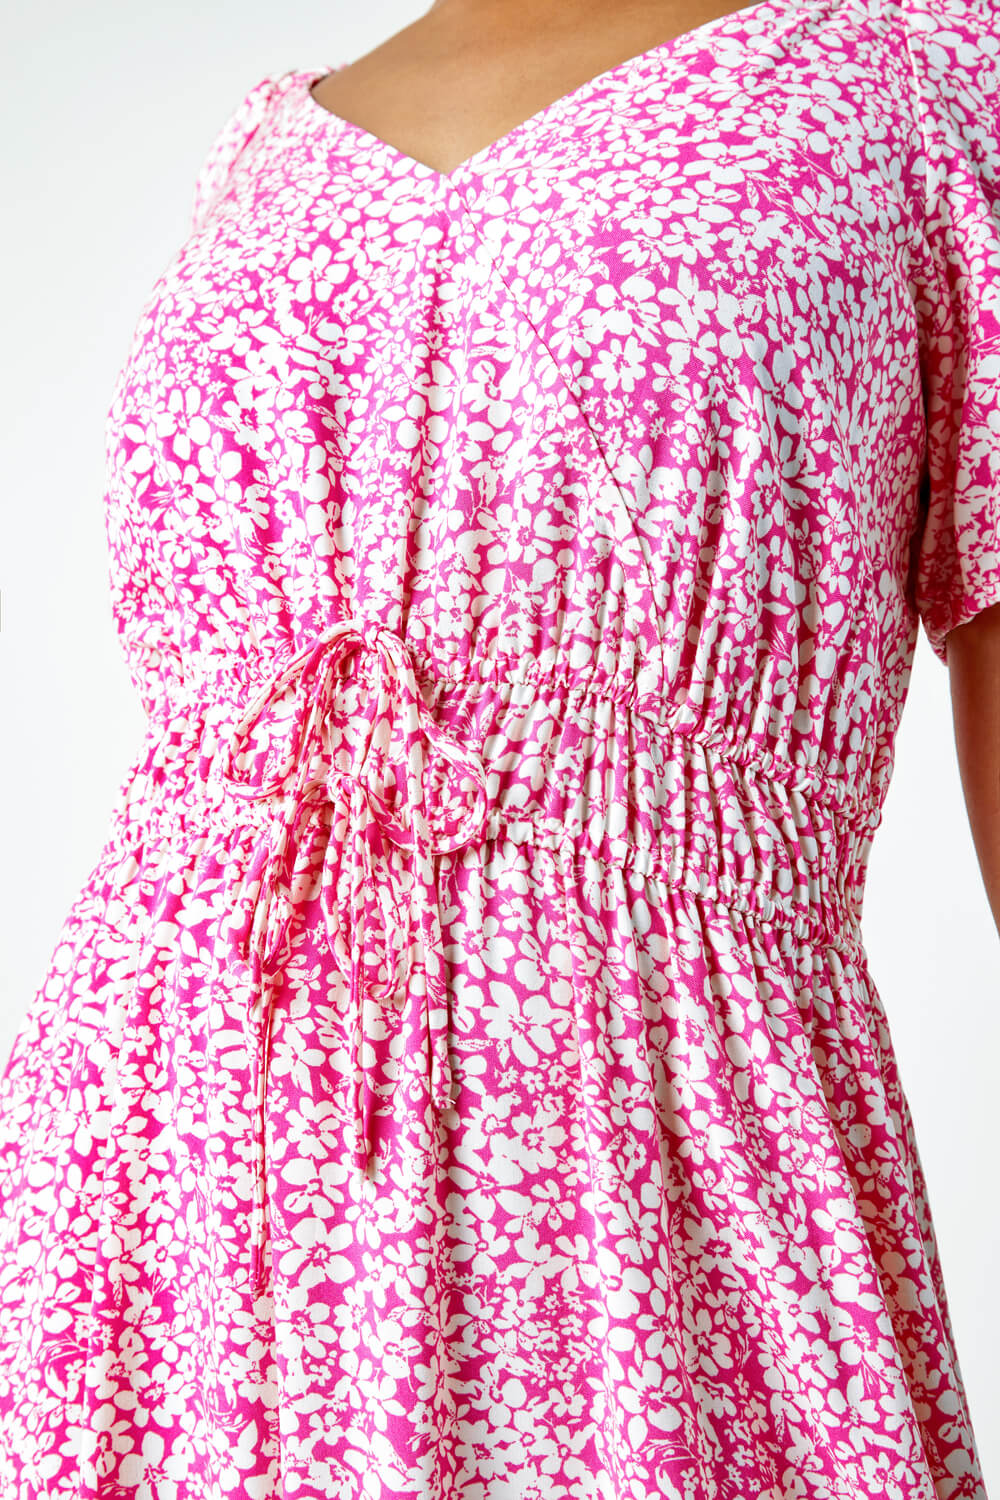 PINK Petite Ditsy Floral Stretch Midi Dress, Image 5 of 6